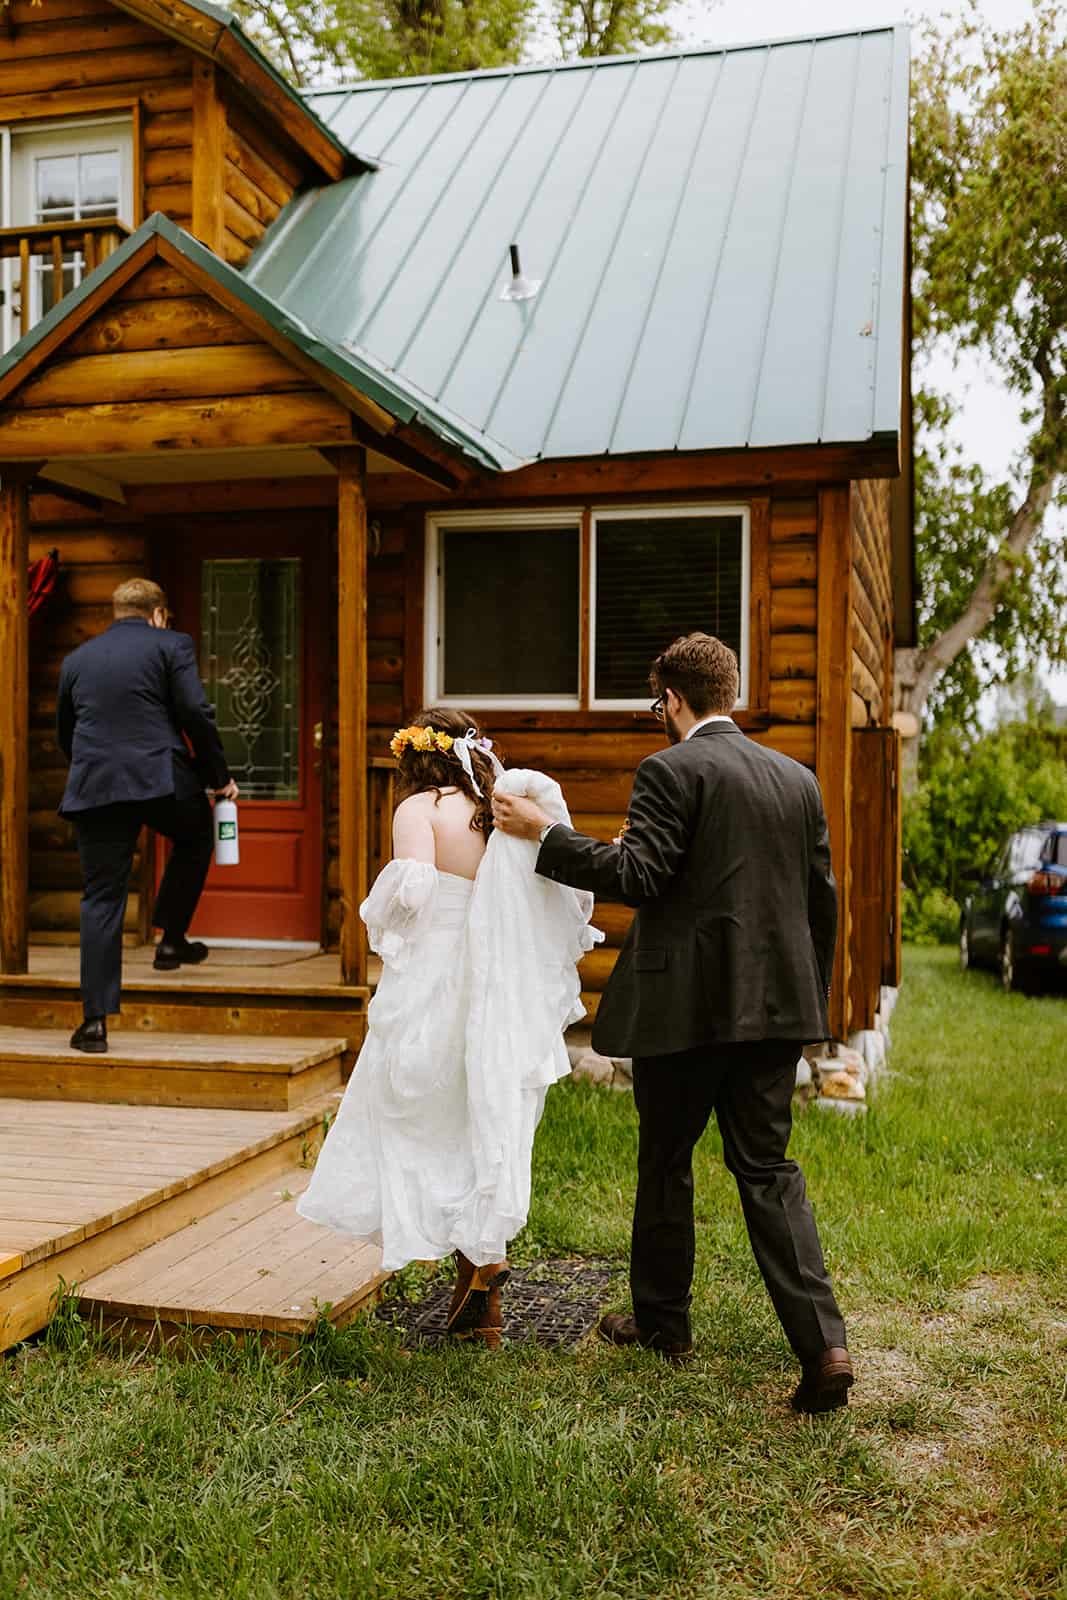 A man helps carry the bottom of a wedding dress into a cabin